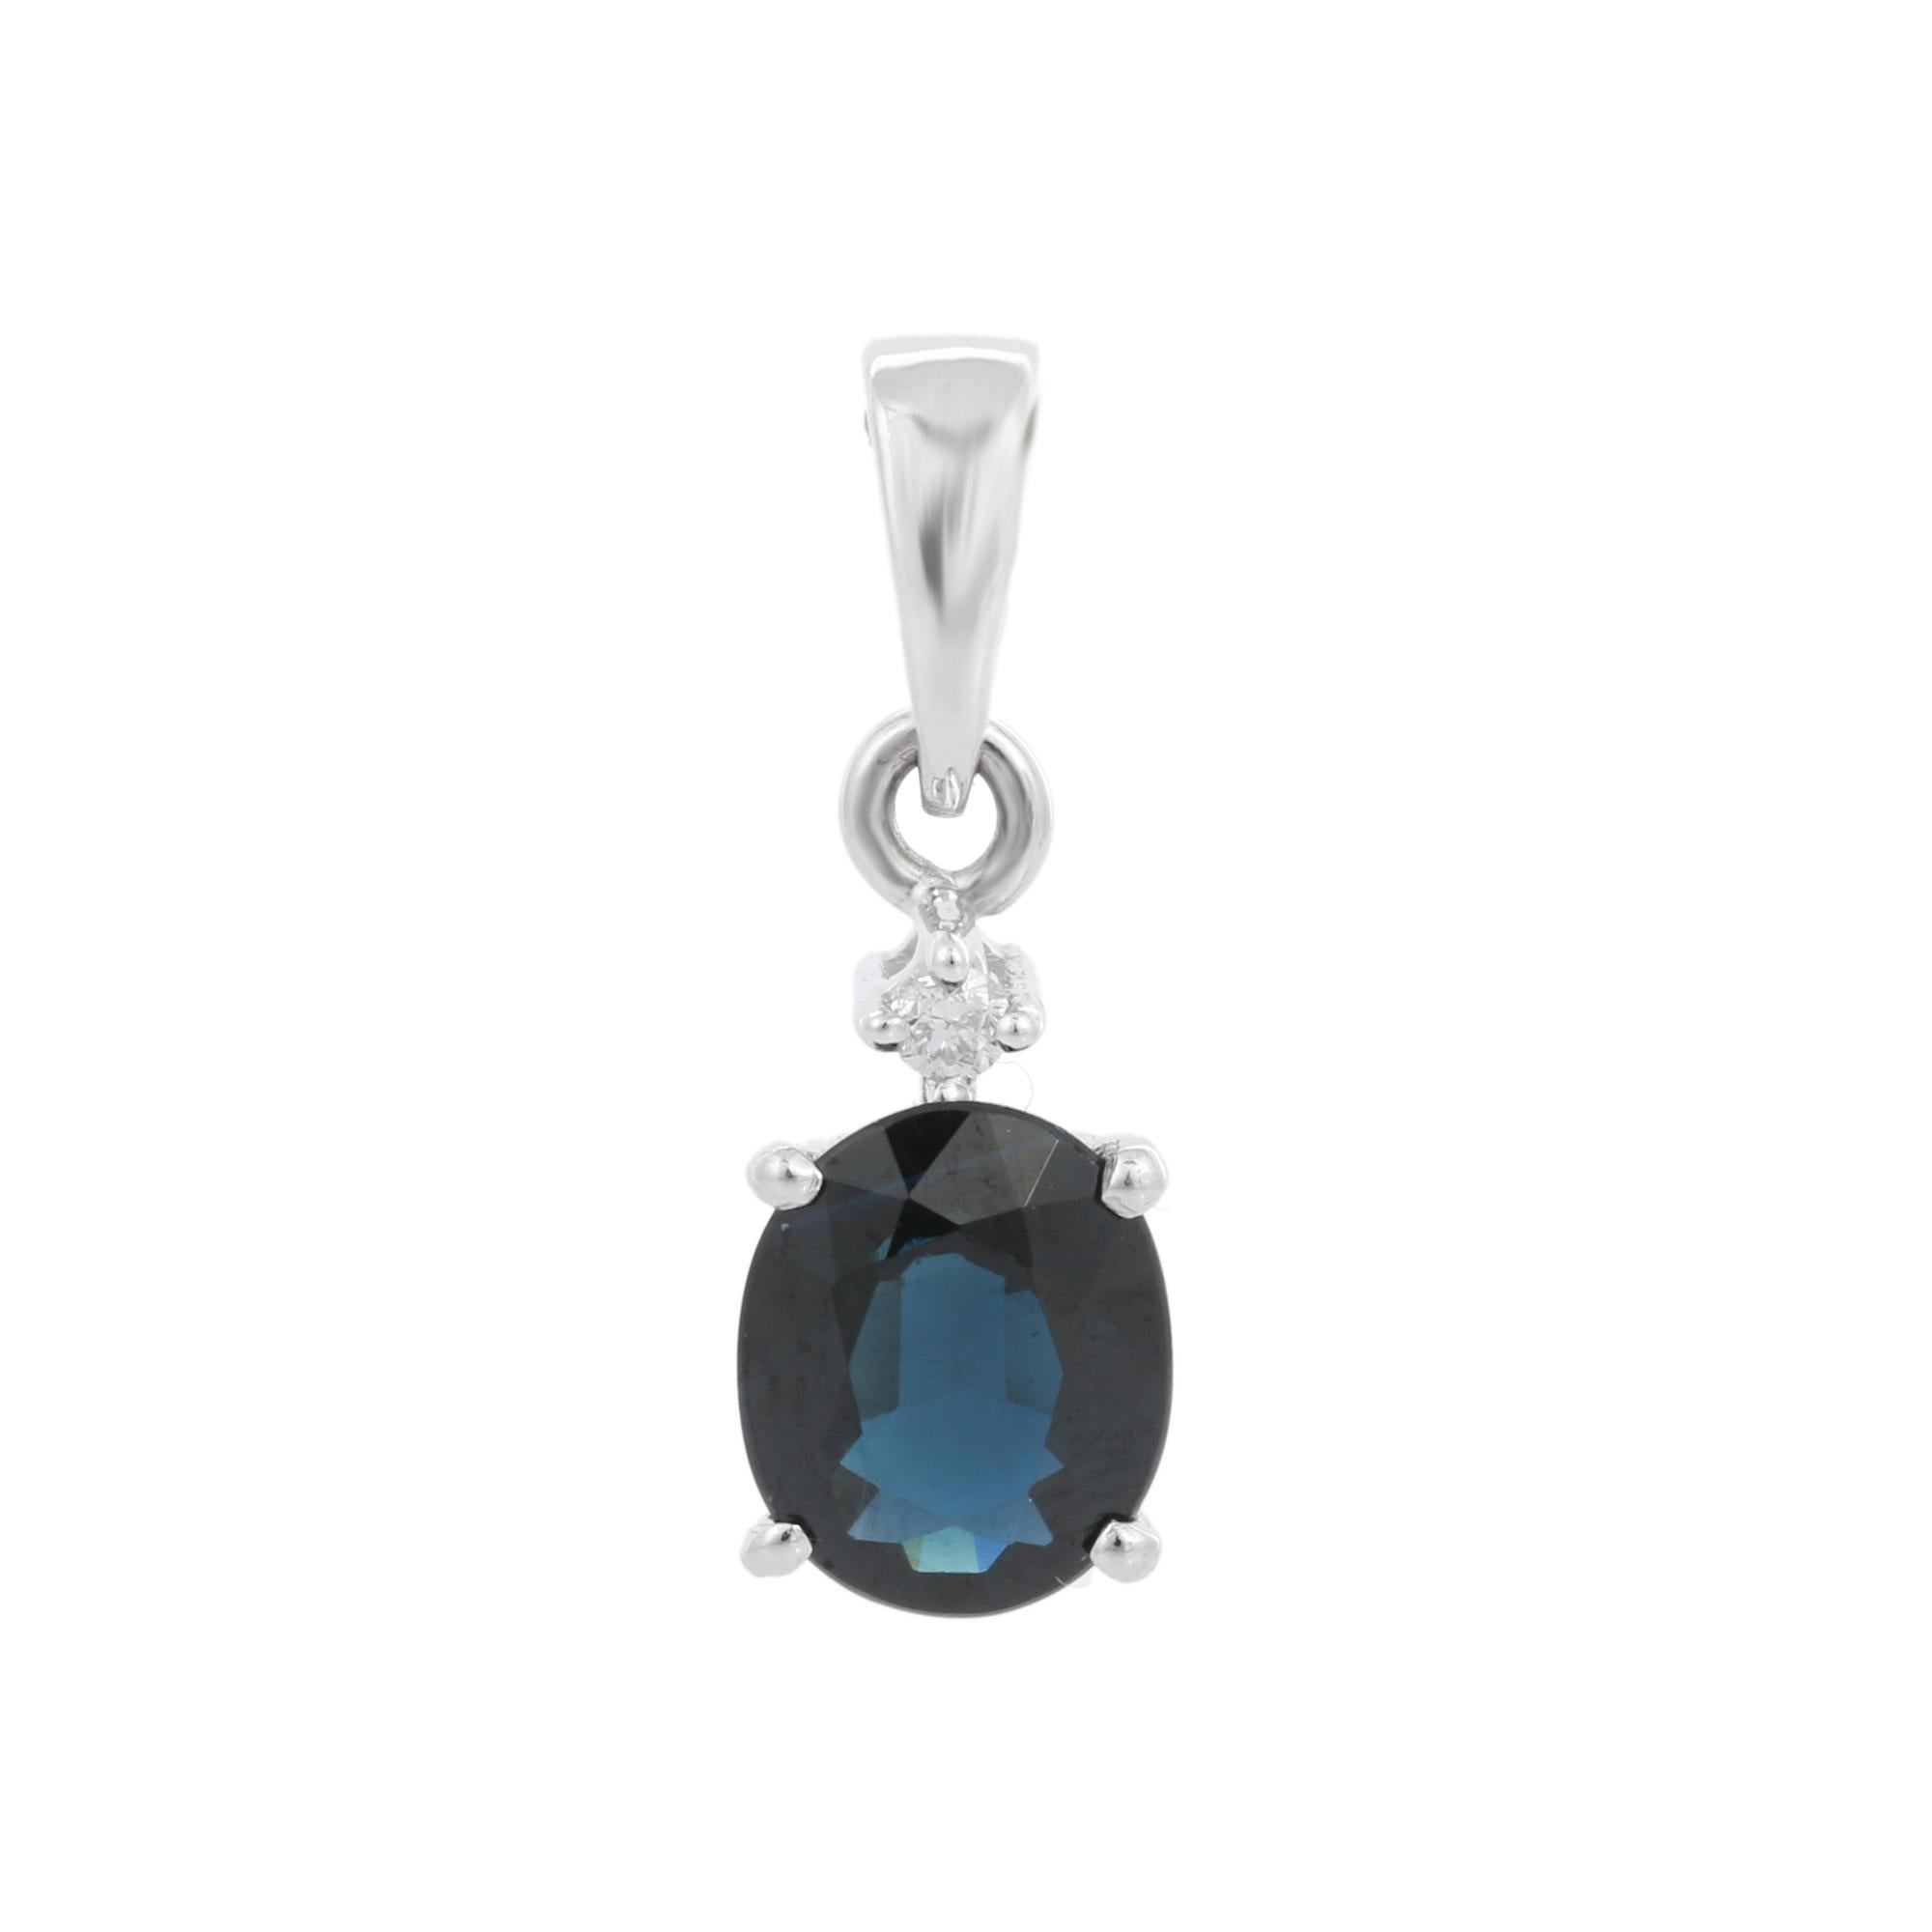 Natural Blue Sapphire pendant in 18K Gold. It has a oval cut sapphire studded with diamond that completes your look with a decent touch. Pendants are used to wear or gifted to represent love and promises. It's an attractive jewelry piece that goes